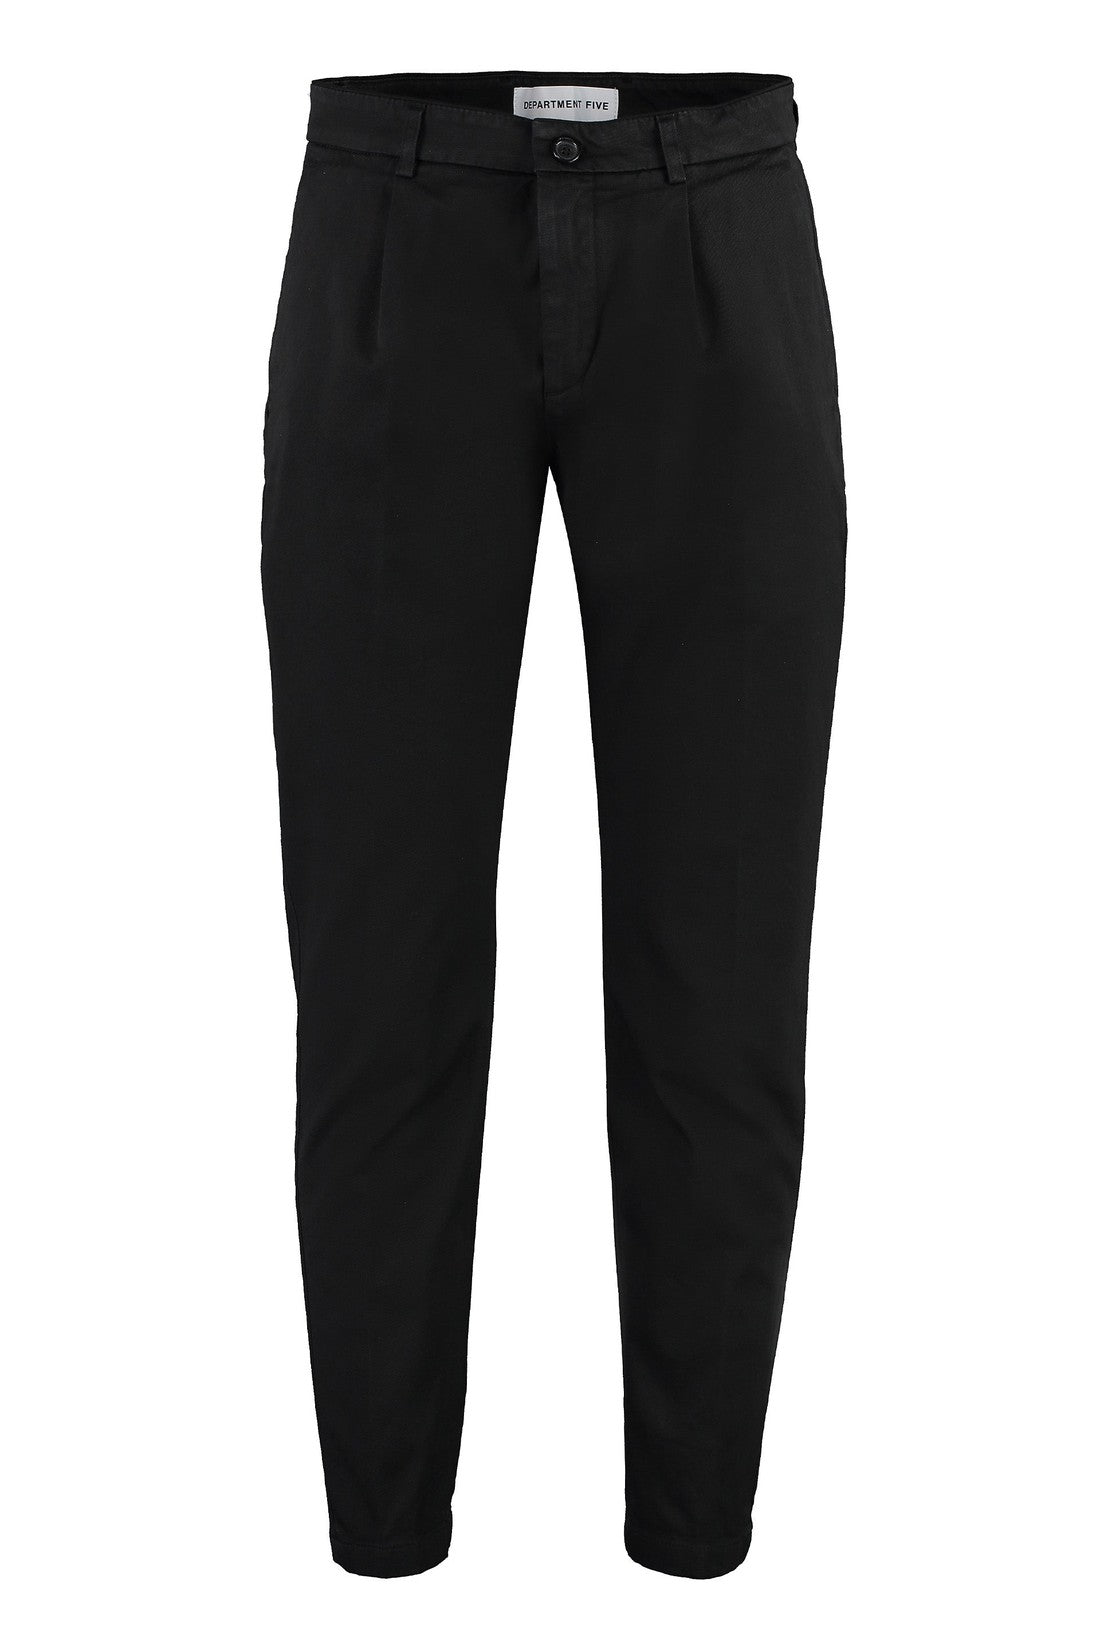 Department 5-OUTLET-SALE-Prince chino pants-ARCHIVIST